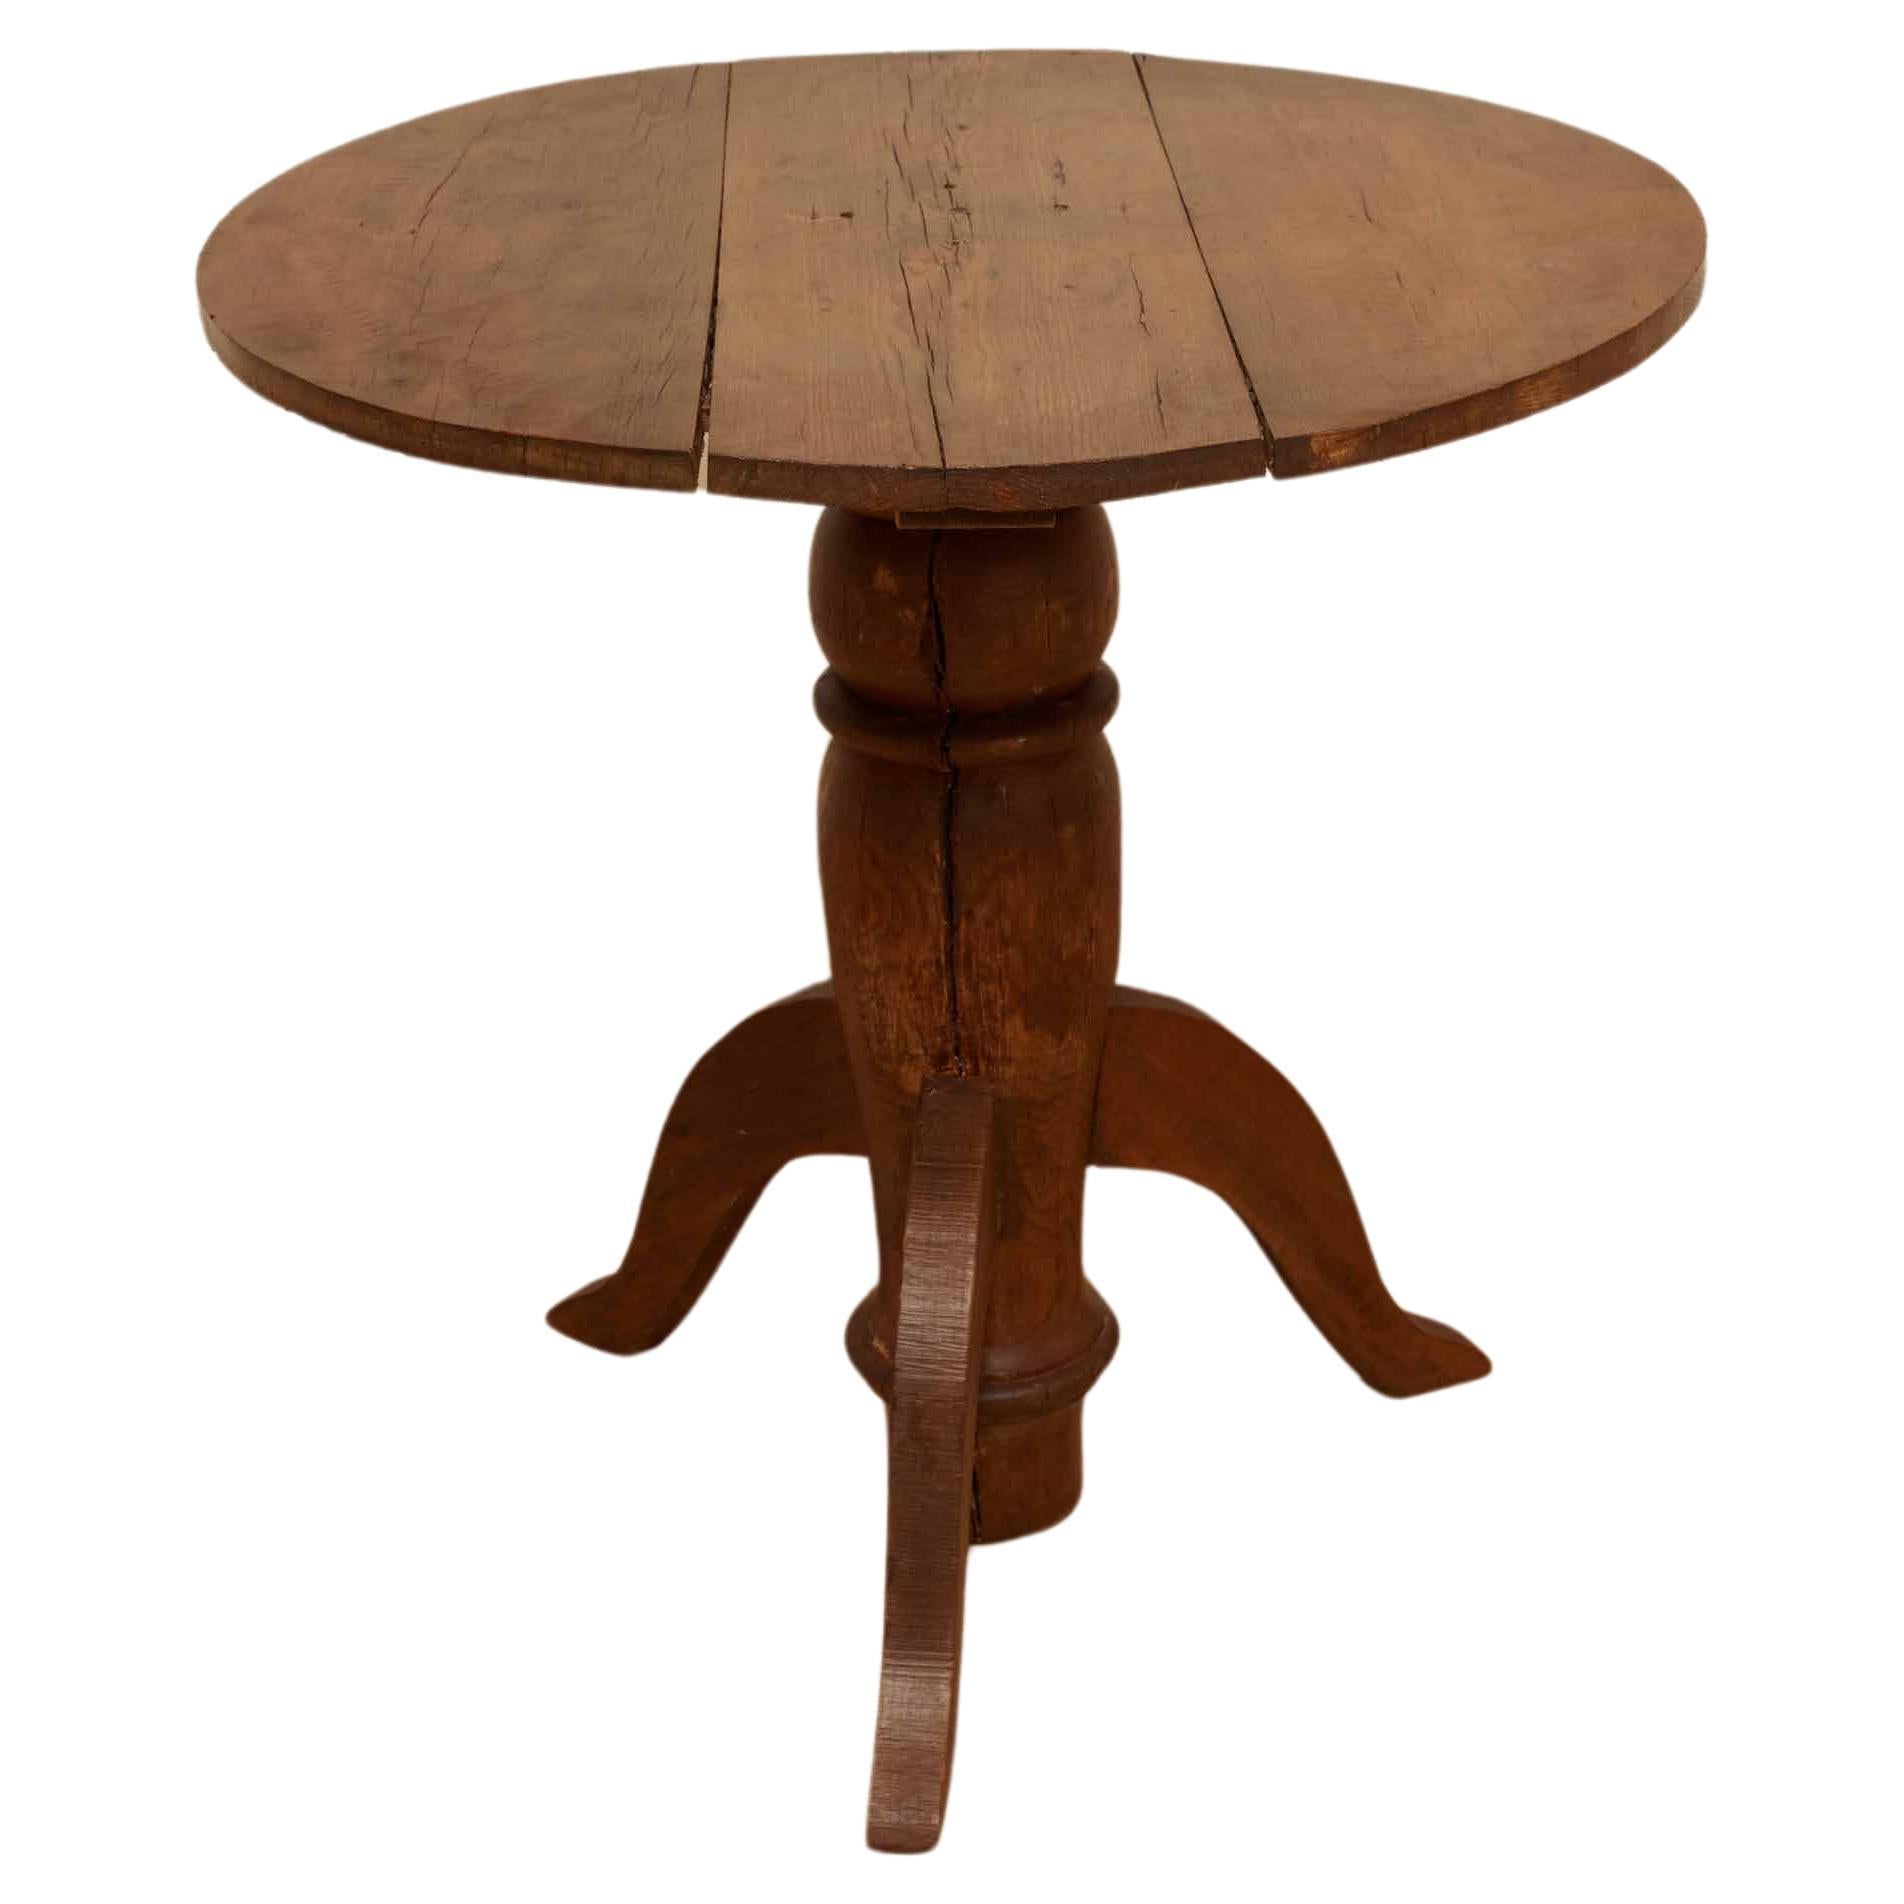 A.C.I.C. Round French Pedestal Table